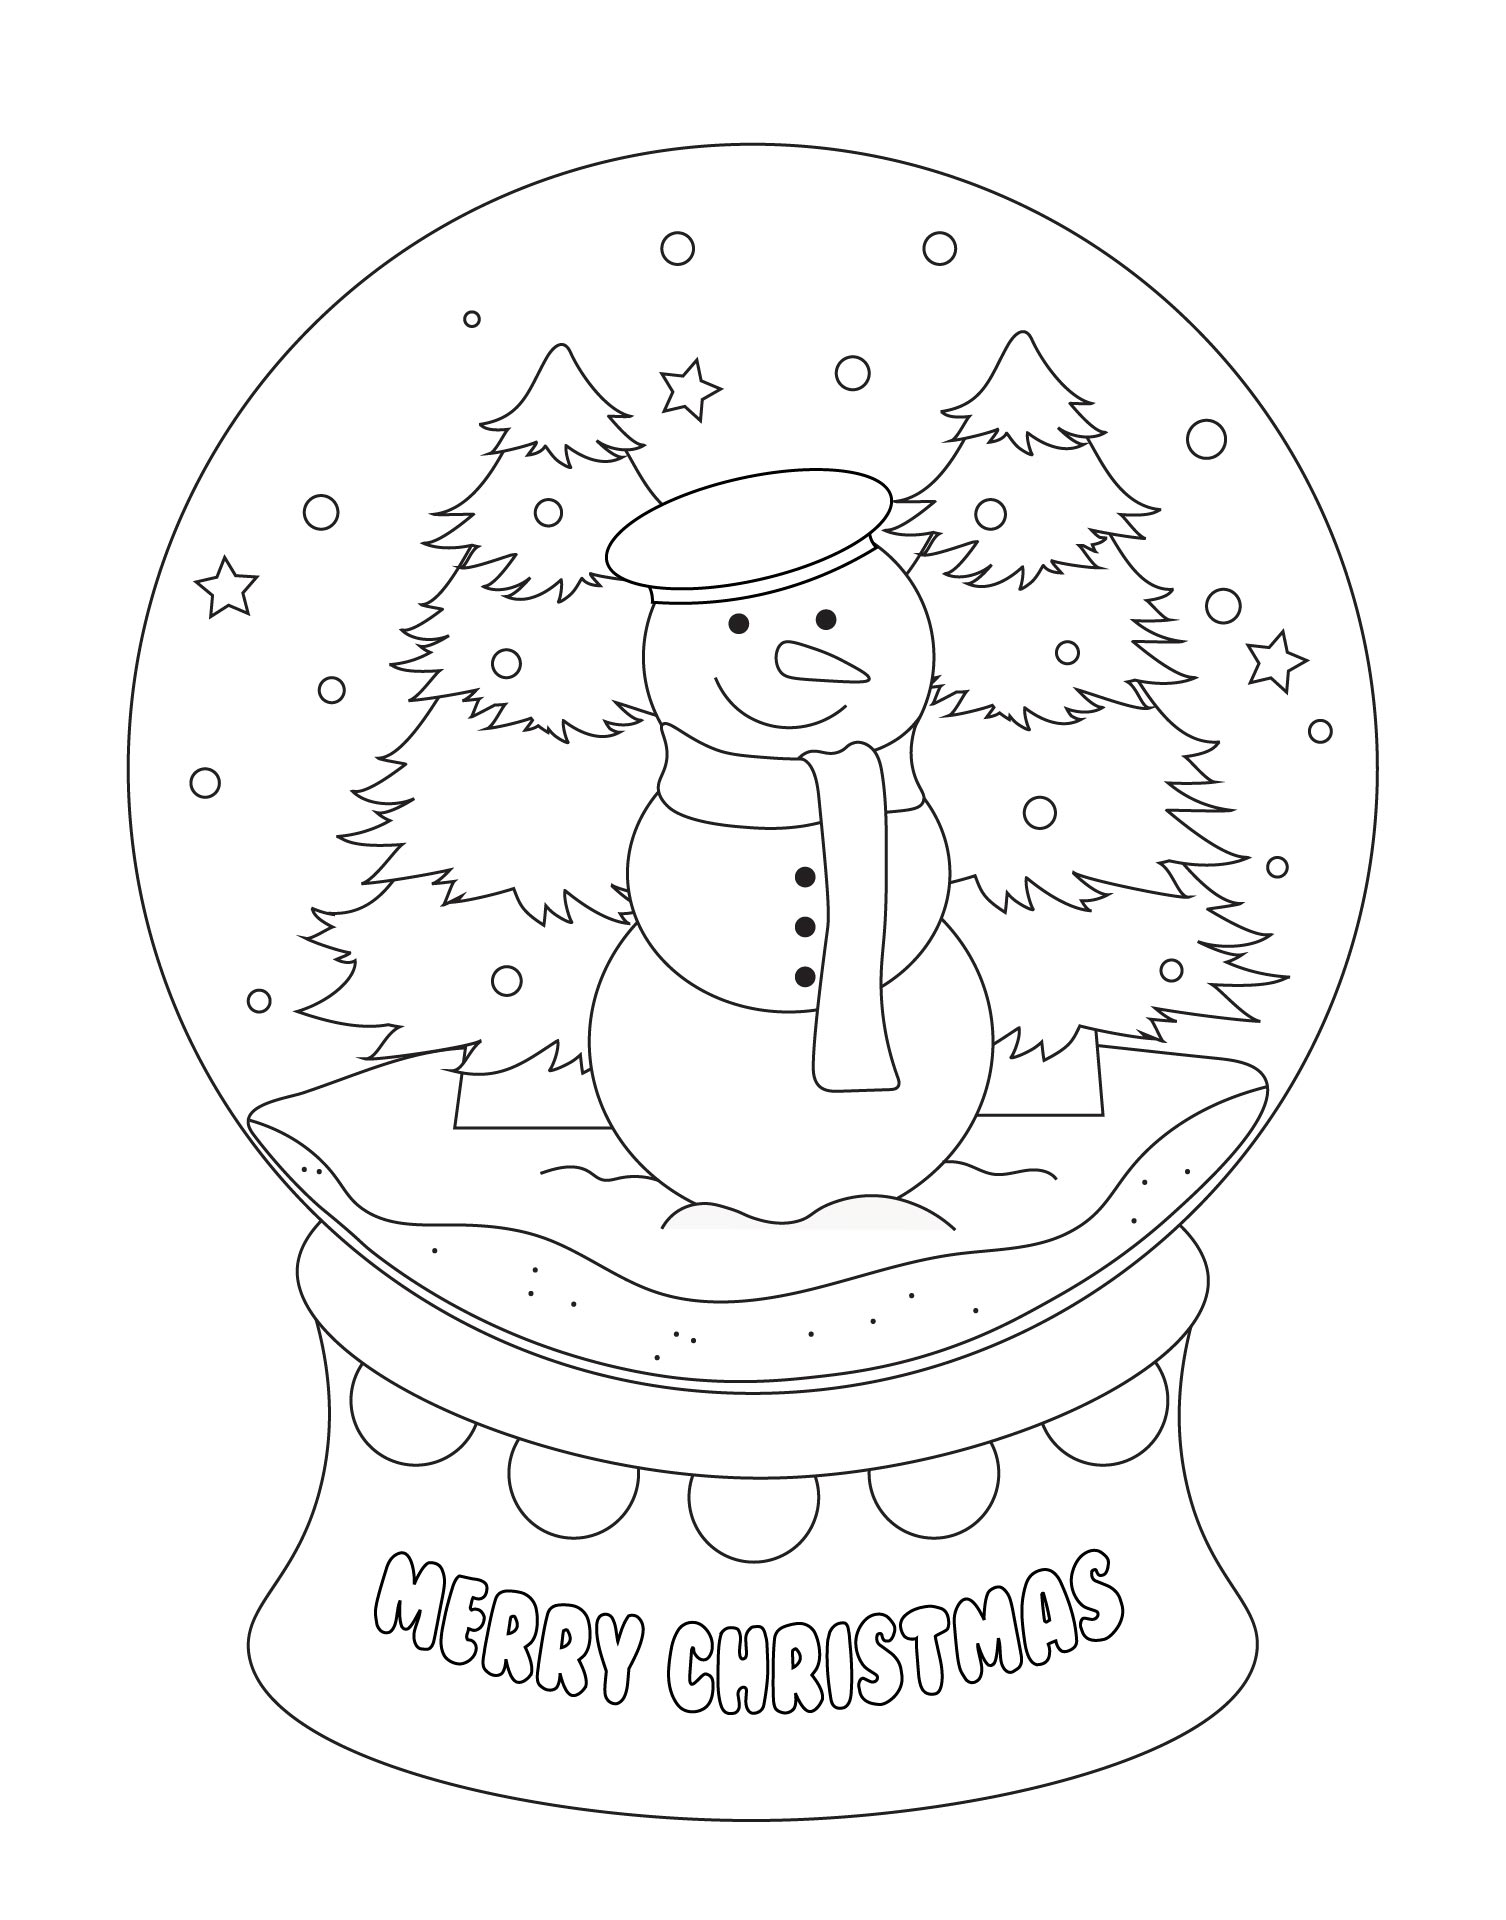 Printable Christmas Gadget Snowball Picture To Color For Kids